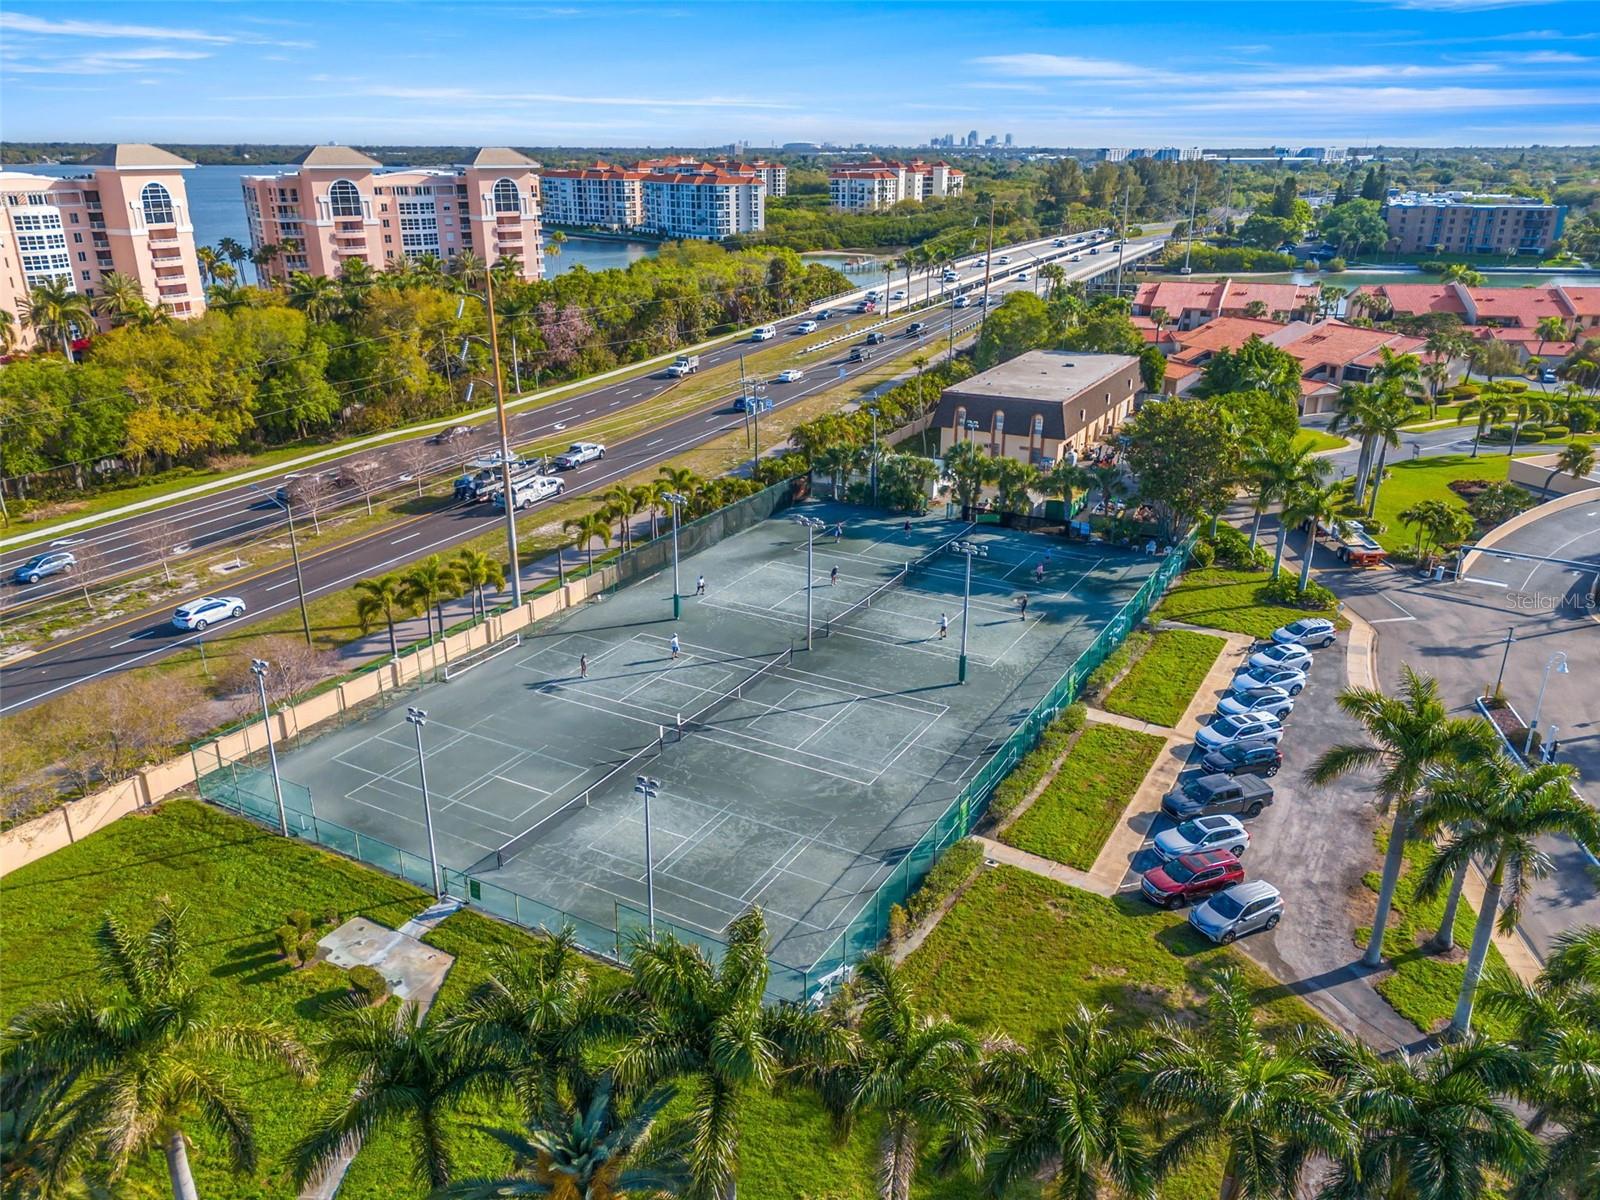 Tennis and Pickelball courts